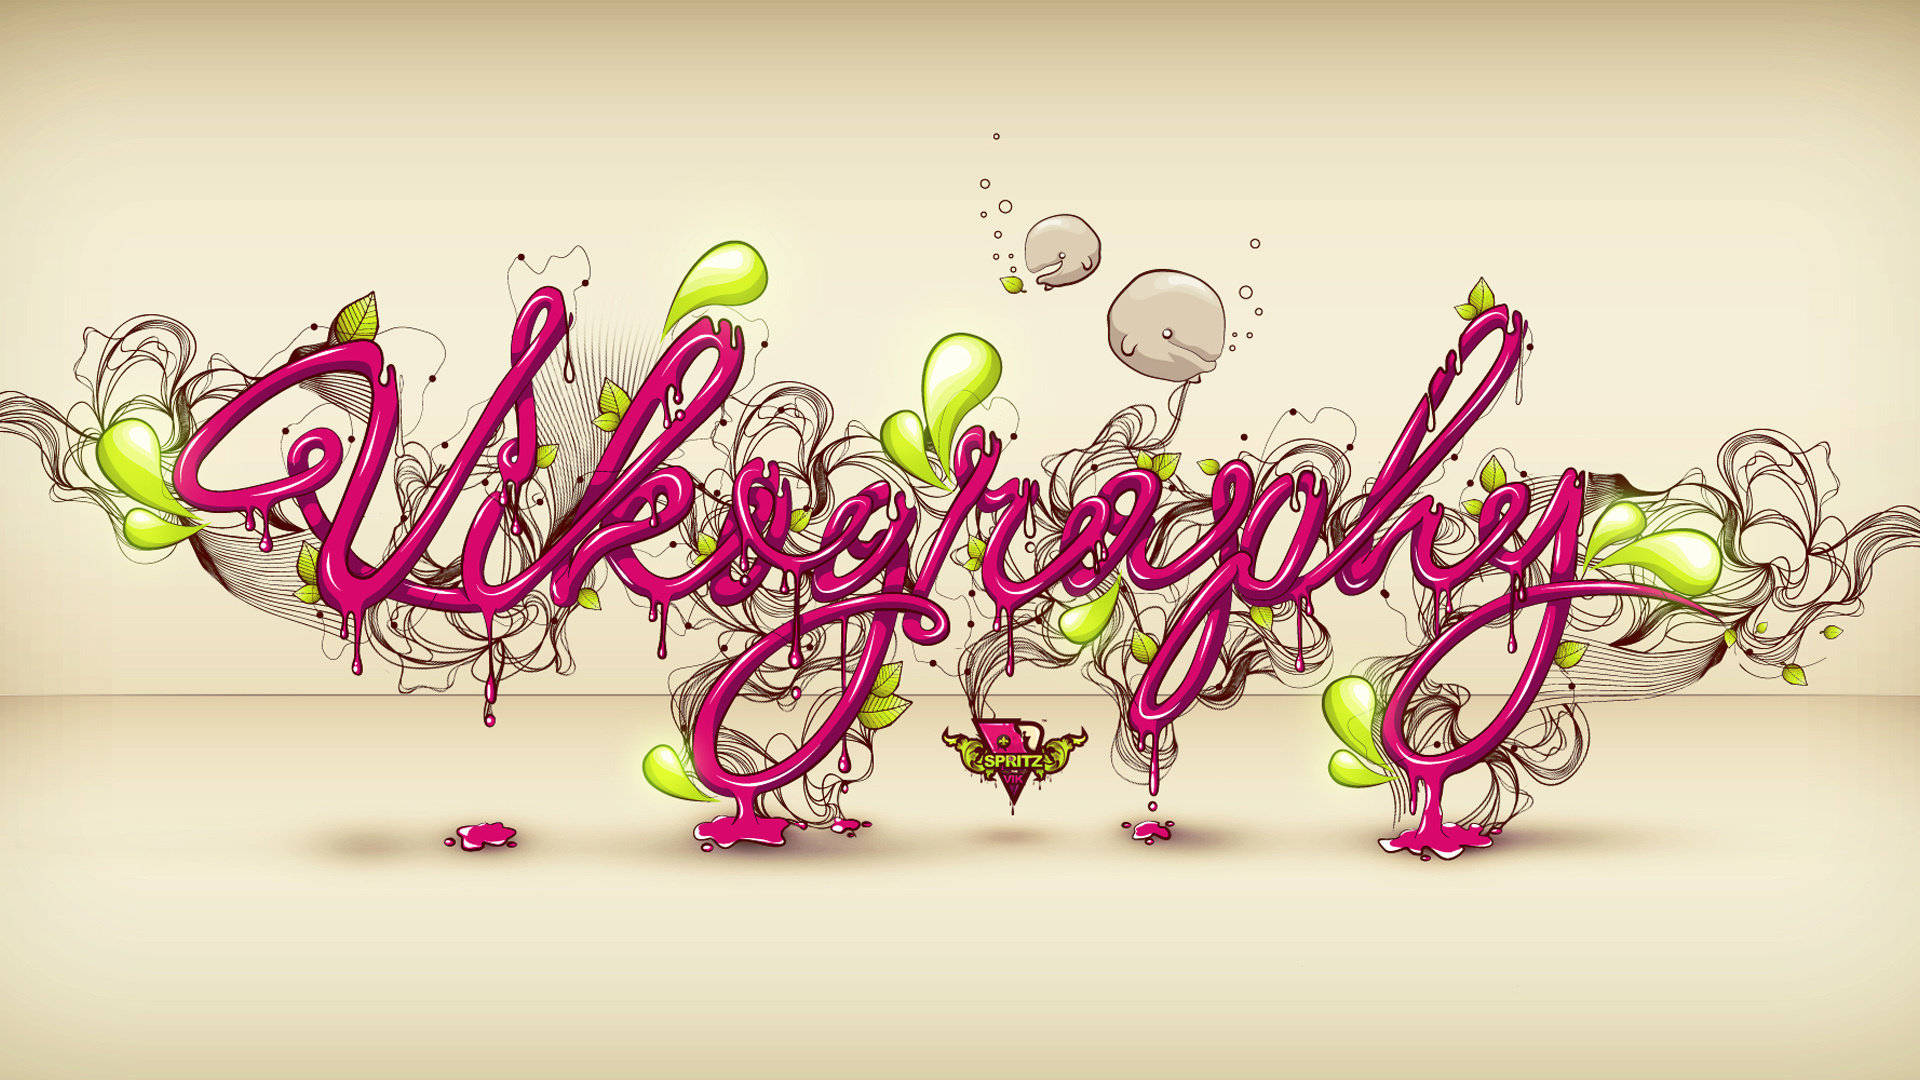 Cute Artistic Typography Background